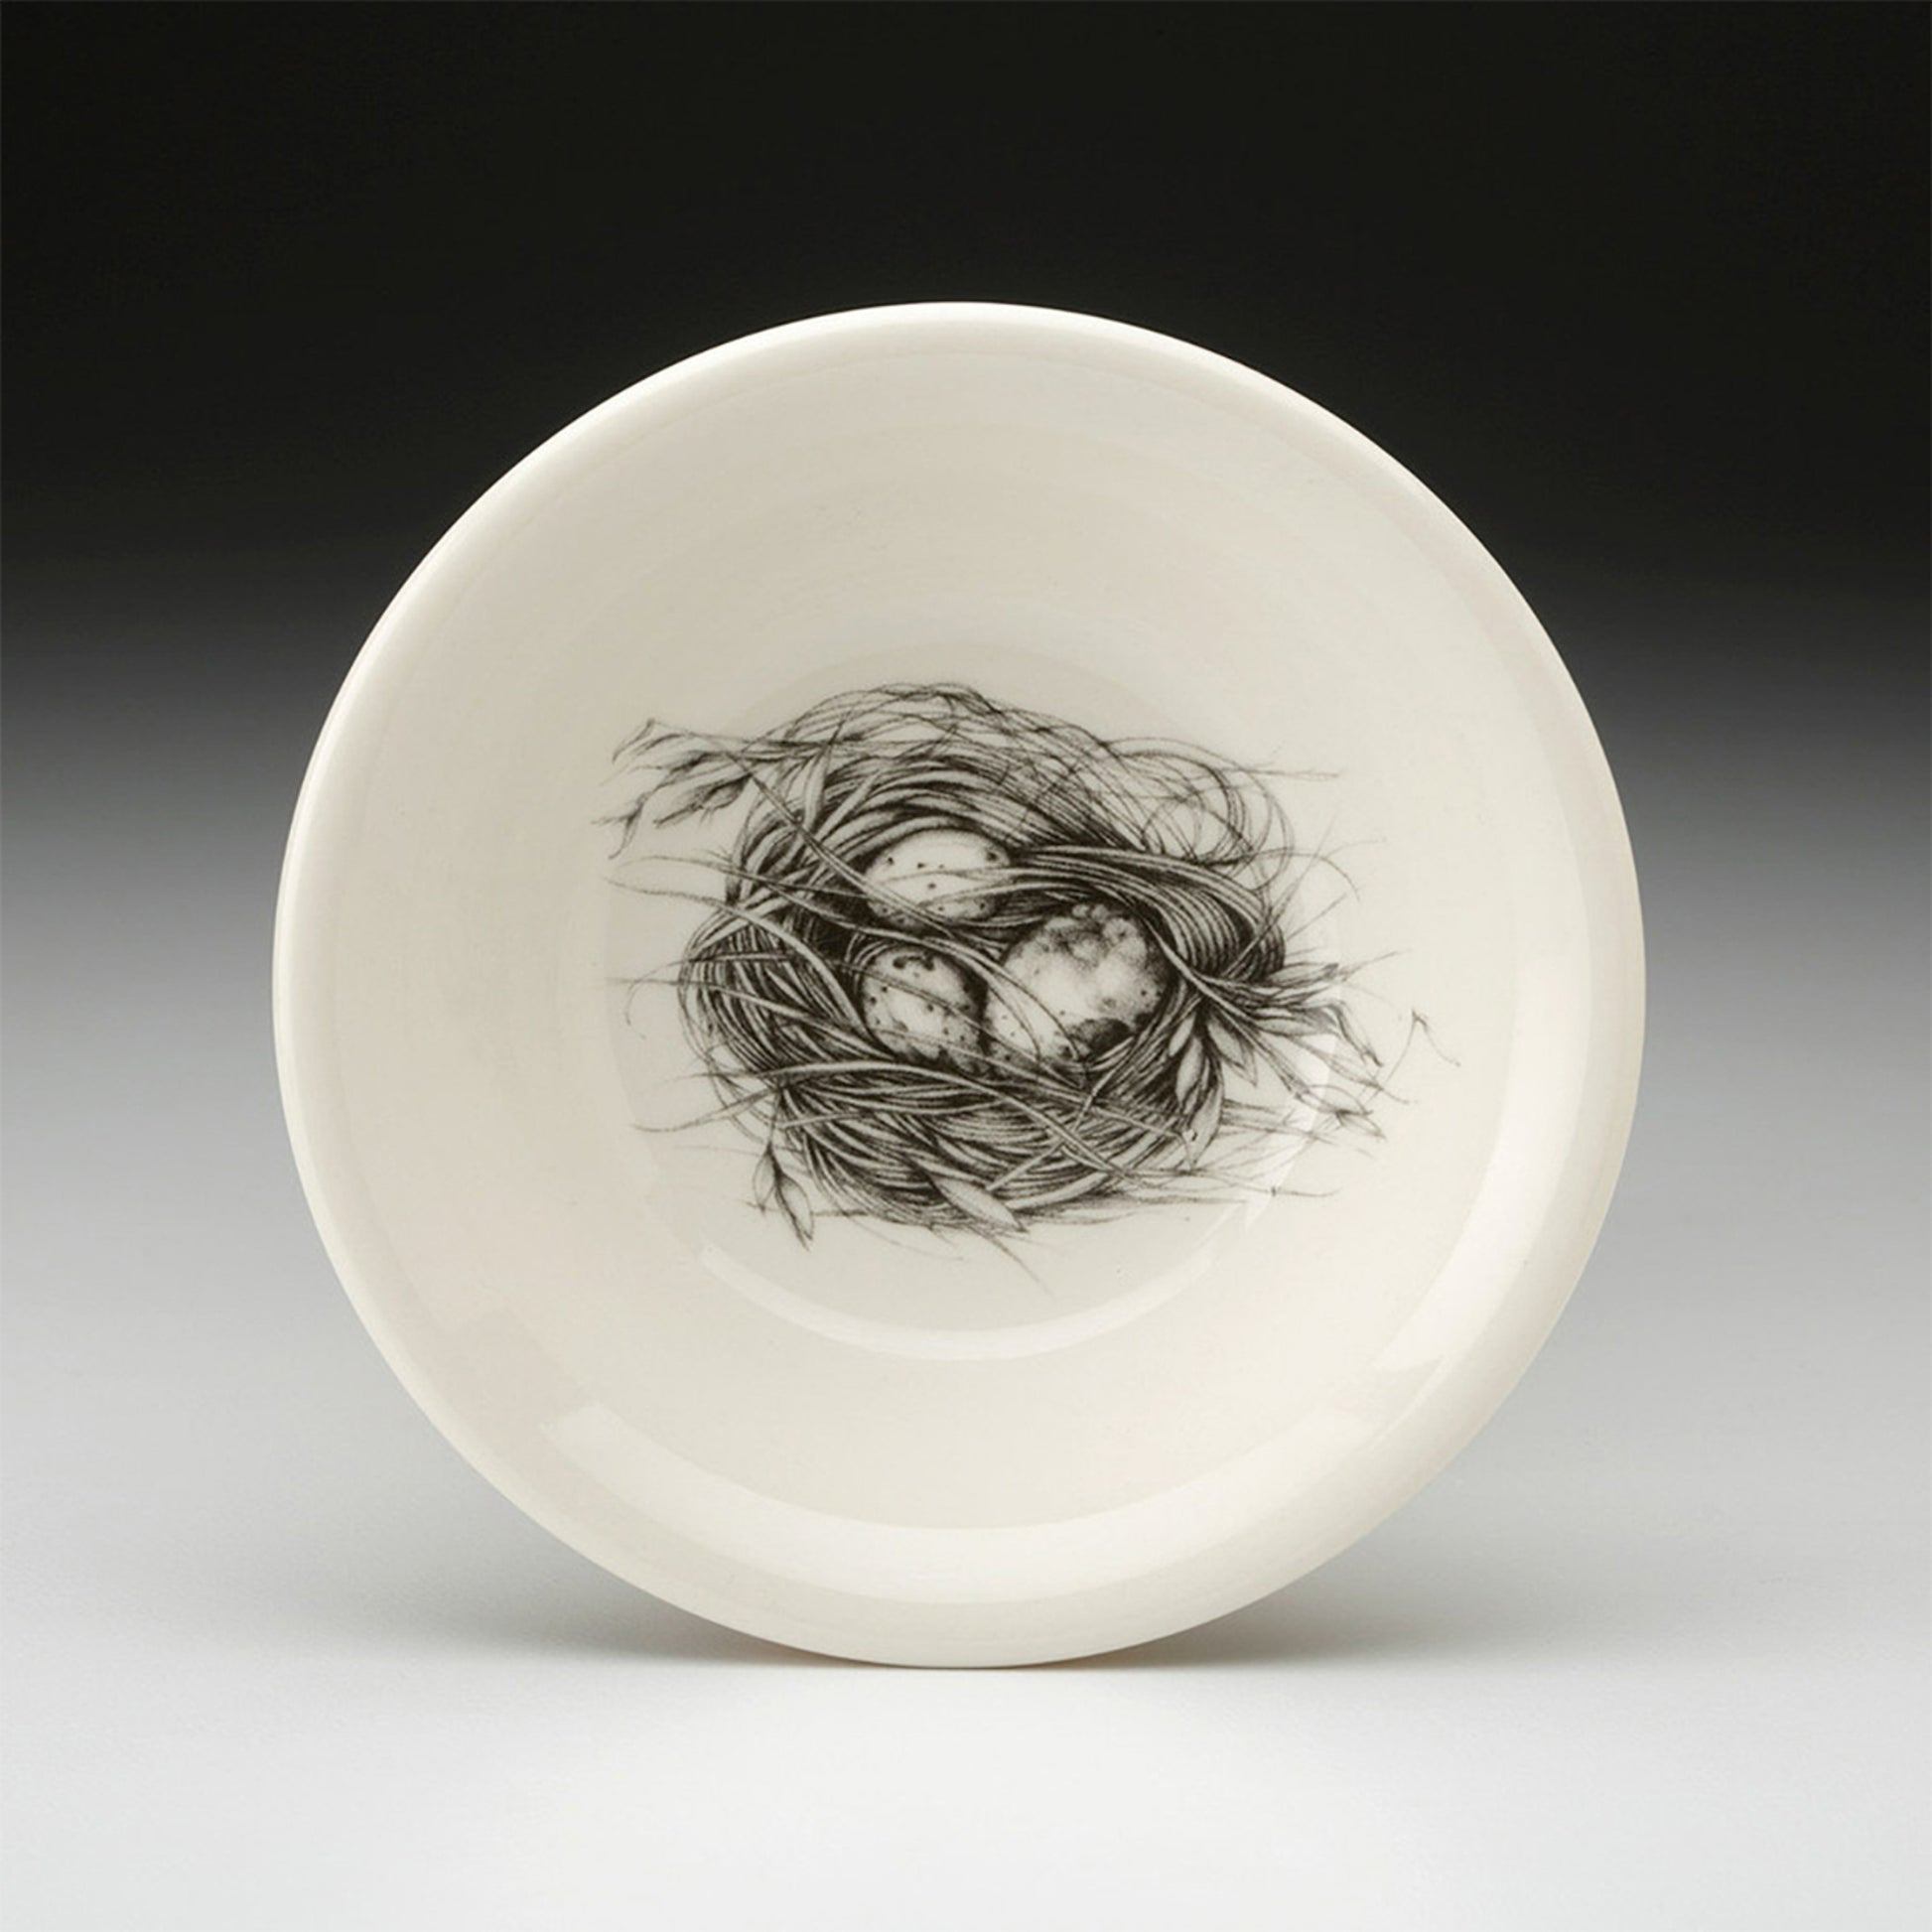 Laura Zindel Sauce Dish - More designs available